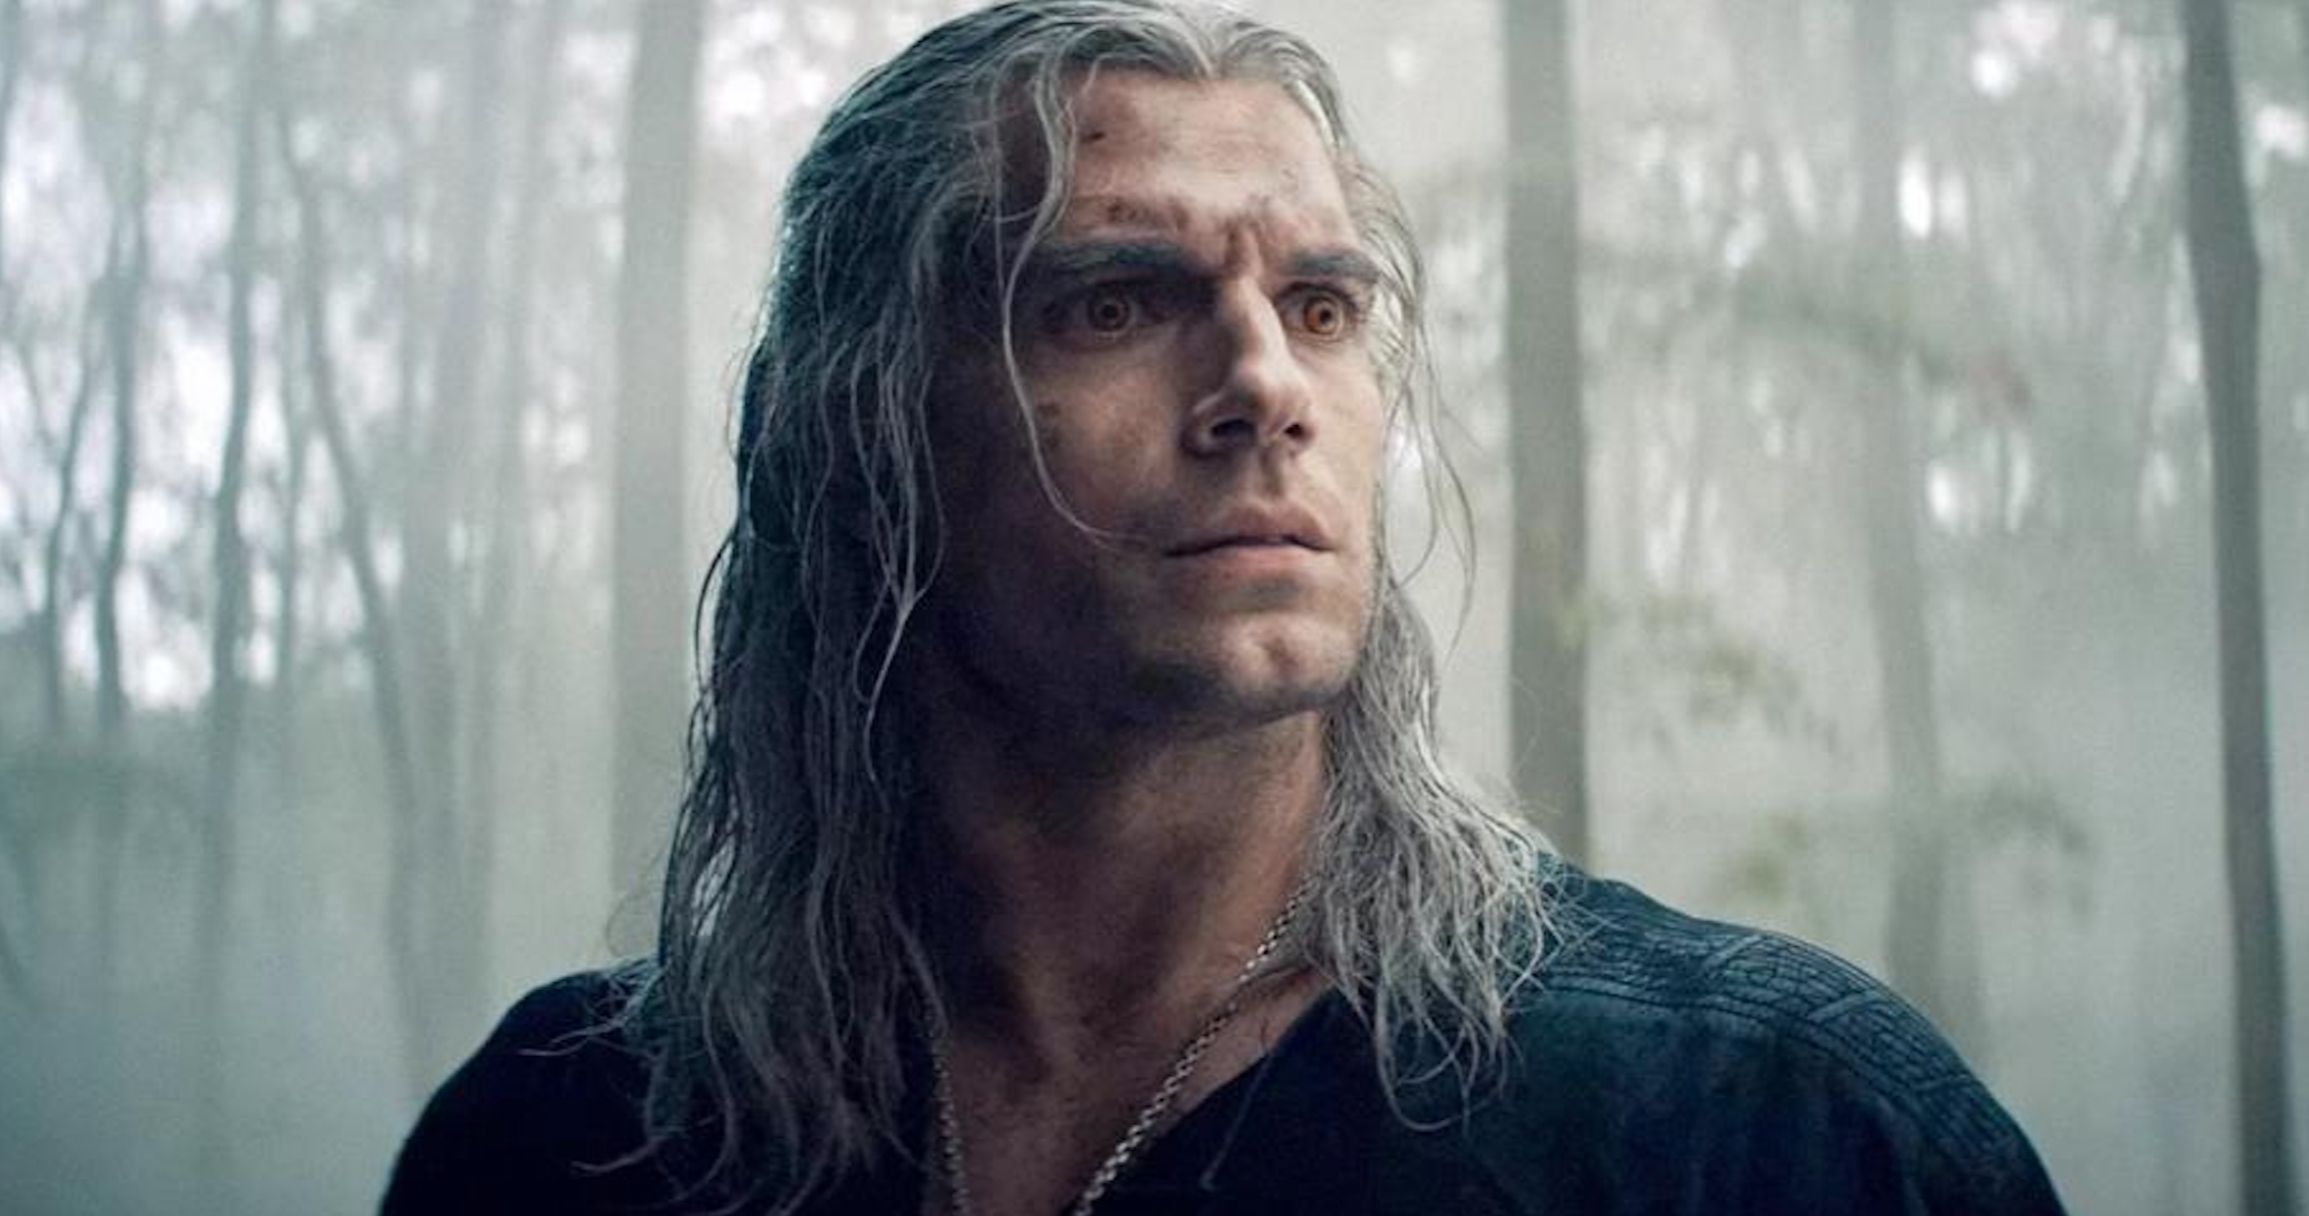 Henry Cavill Shares Encouraging Update Following His Injury on The Witcher Set